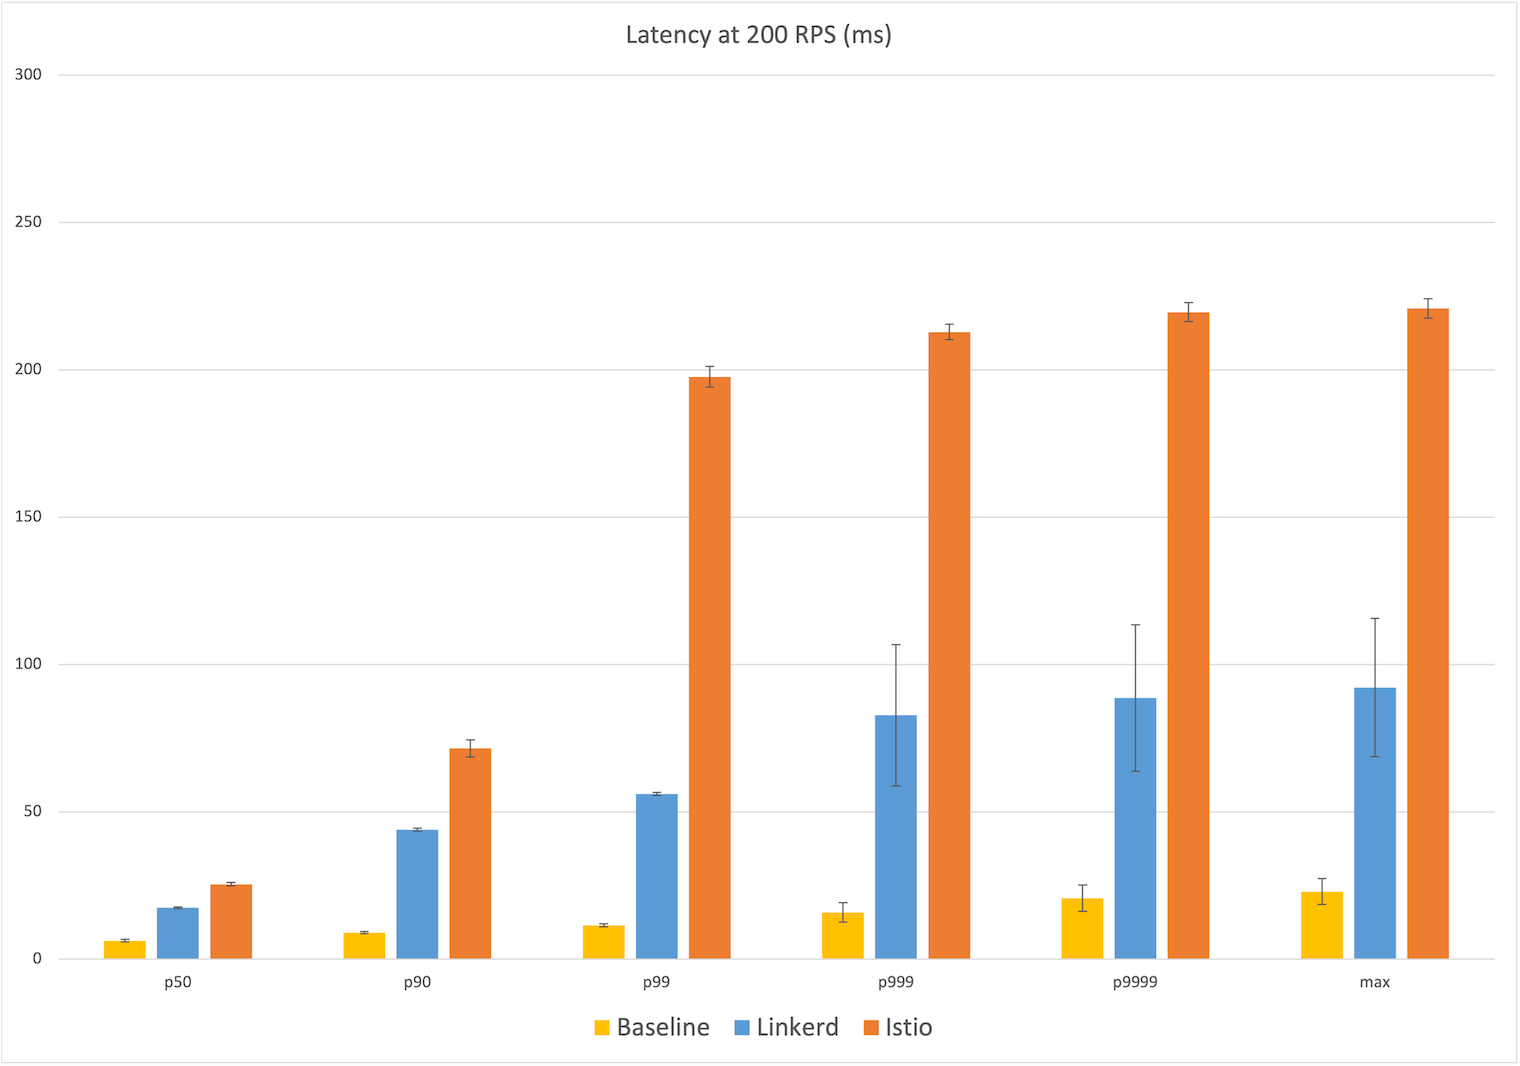 Bar chart showing comparison between baseline, Linkerd and Istio with latency at 200 RPS (ms) where Istio shows the highest number among all